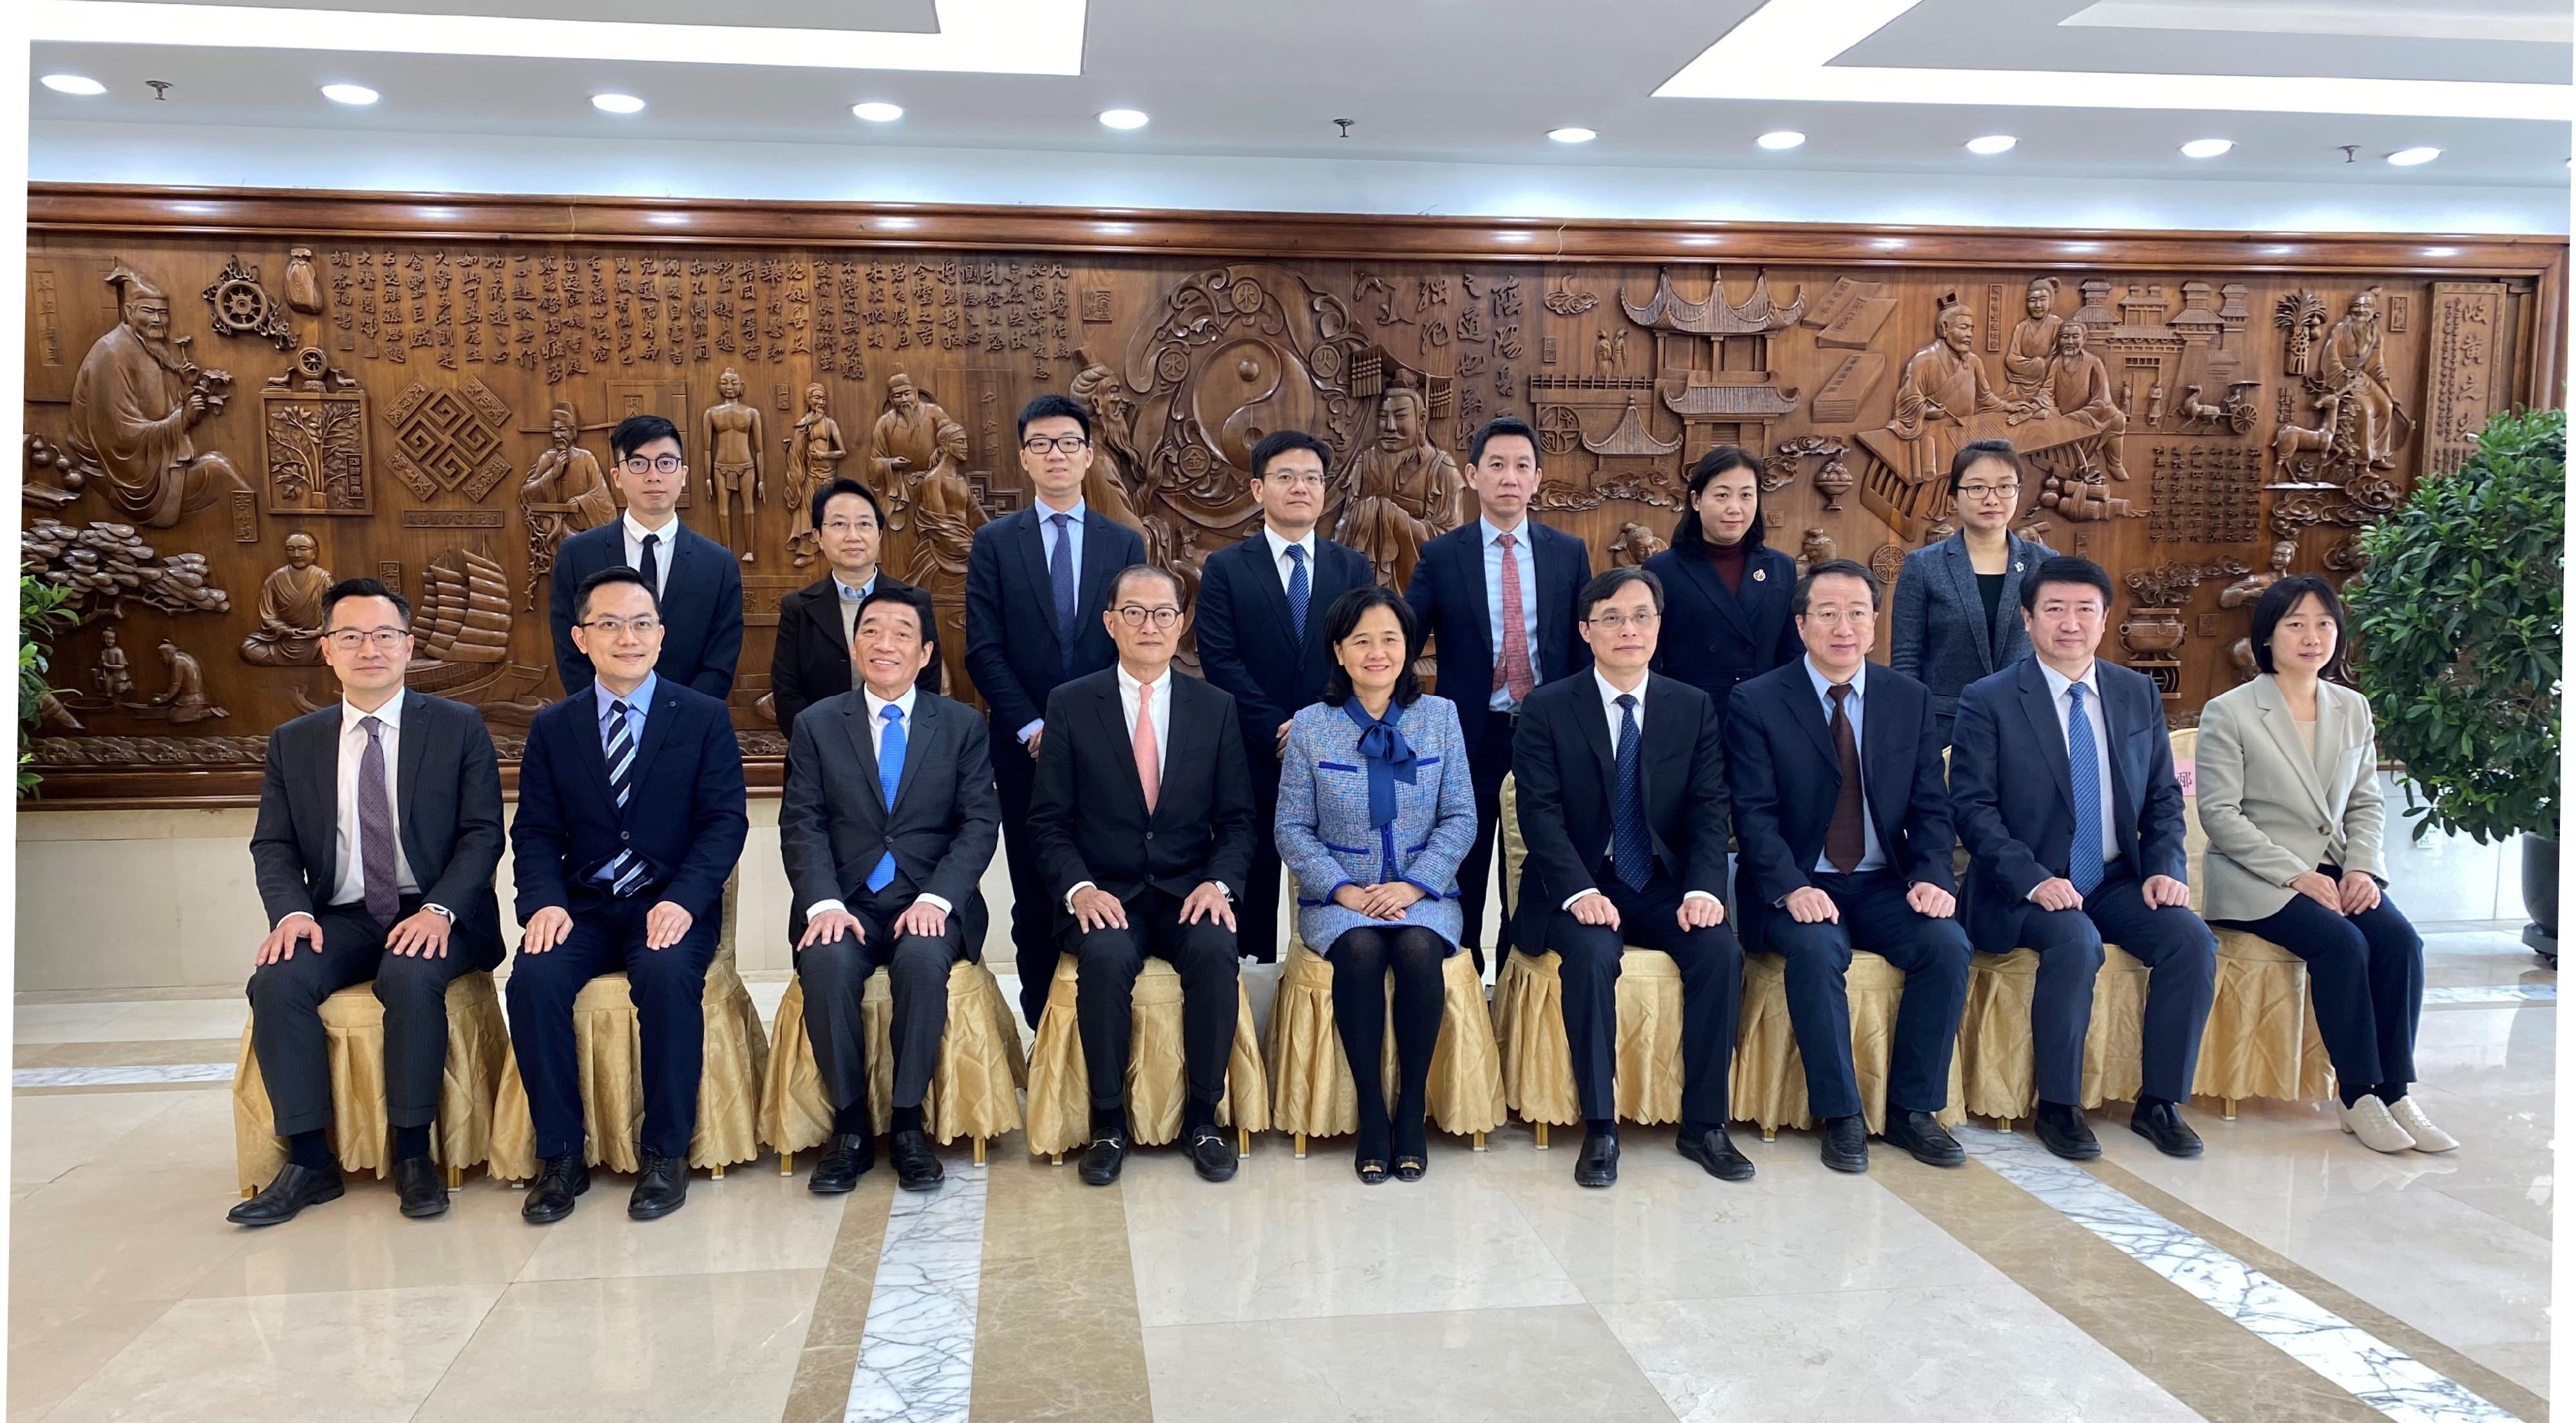 The Secretary for Health, Professor Lo Chung-mau and his delegation called on the National Administration of Traditional Chinese Medicine (NATCM) today (March 16). Photo shows Professor Lo (front row, fourth left); the Party Secretary and Vice Commissioner of the NATCM, Professor Yu Yanhong (front row, fifth left); Vice Commissioner of the NATCM, Professor Huang Luqi (front row, fourth right); the Director of Health, Dr Ronald Lam (front row, second left); Deputy Secretary for Health Mr Eddie Lee (front row, first left); the Chairman of the Hospital Authority, Mr Henry Fan (front row, third left), and other attendees of the meeting.